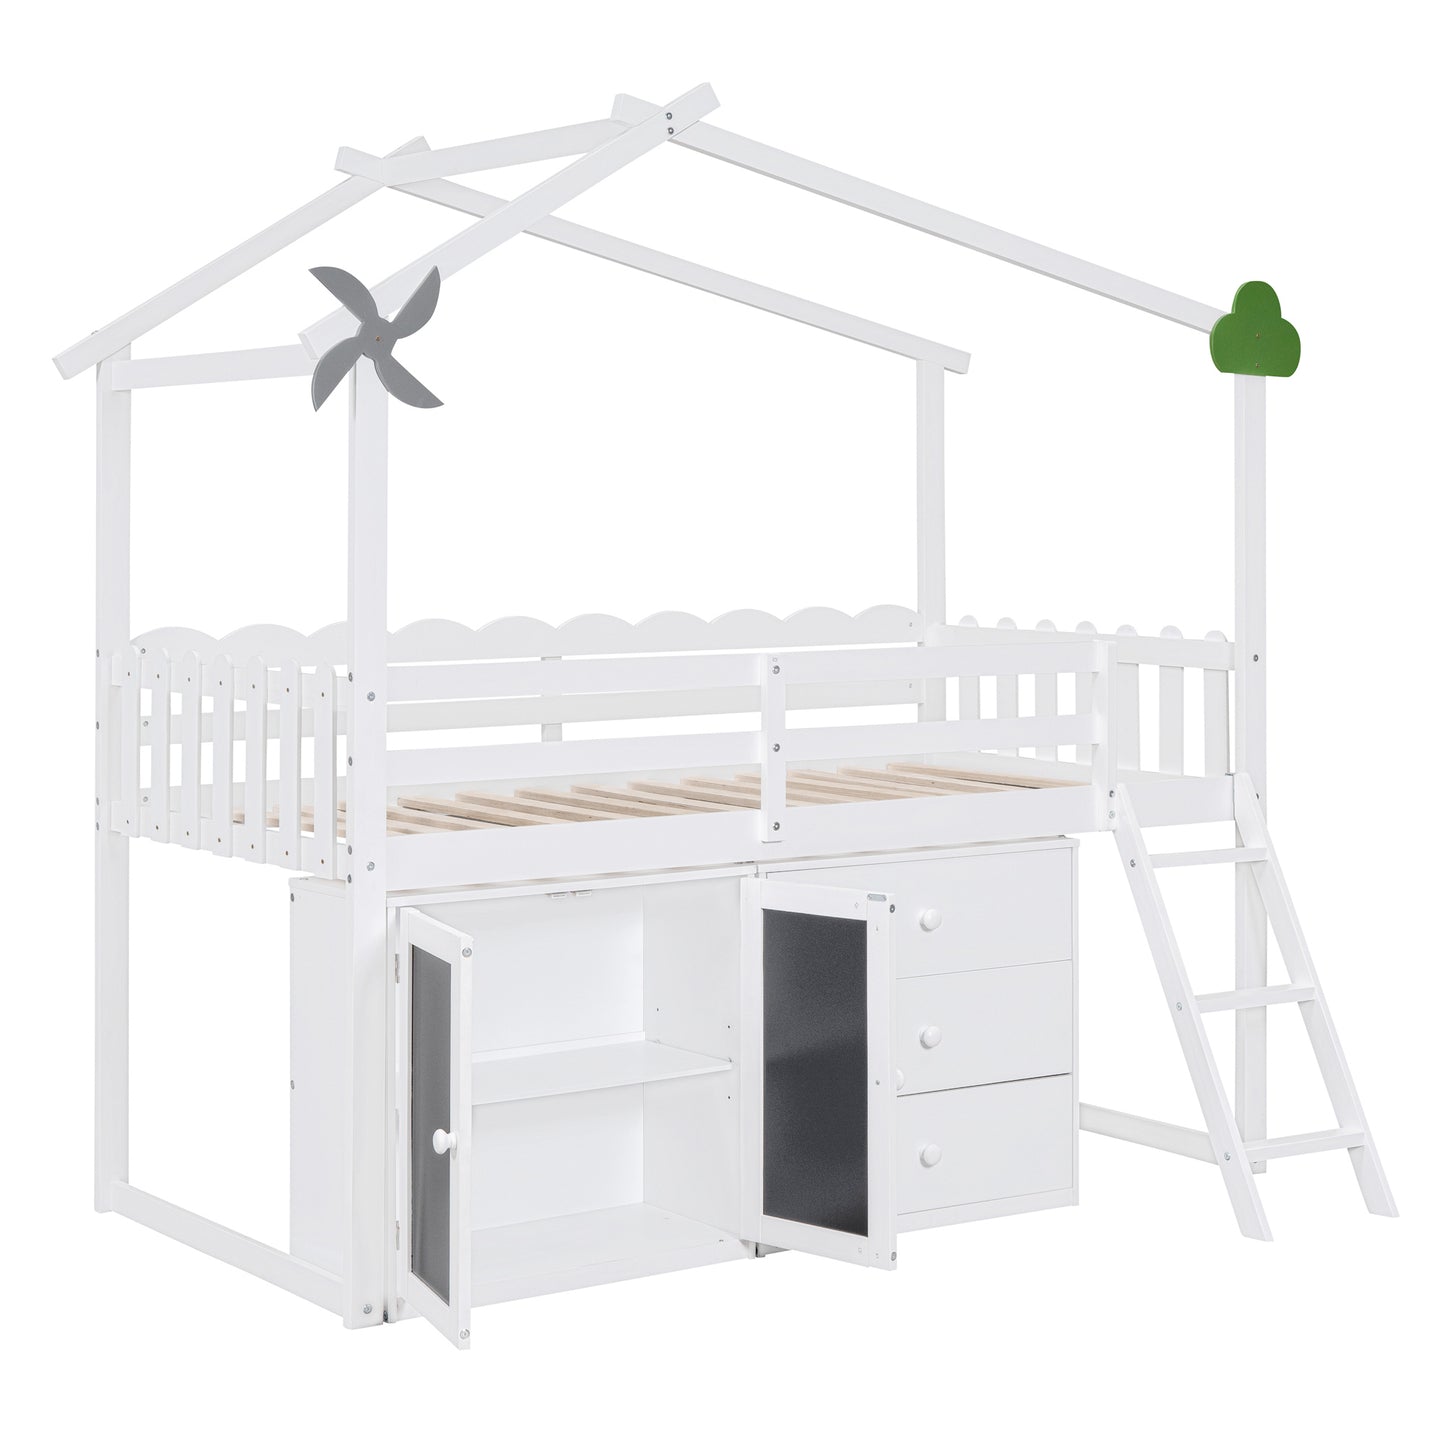 Twin Size House Platform Bed With Cabinet and Drawers, White